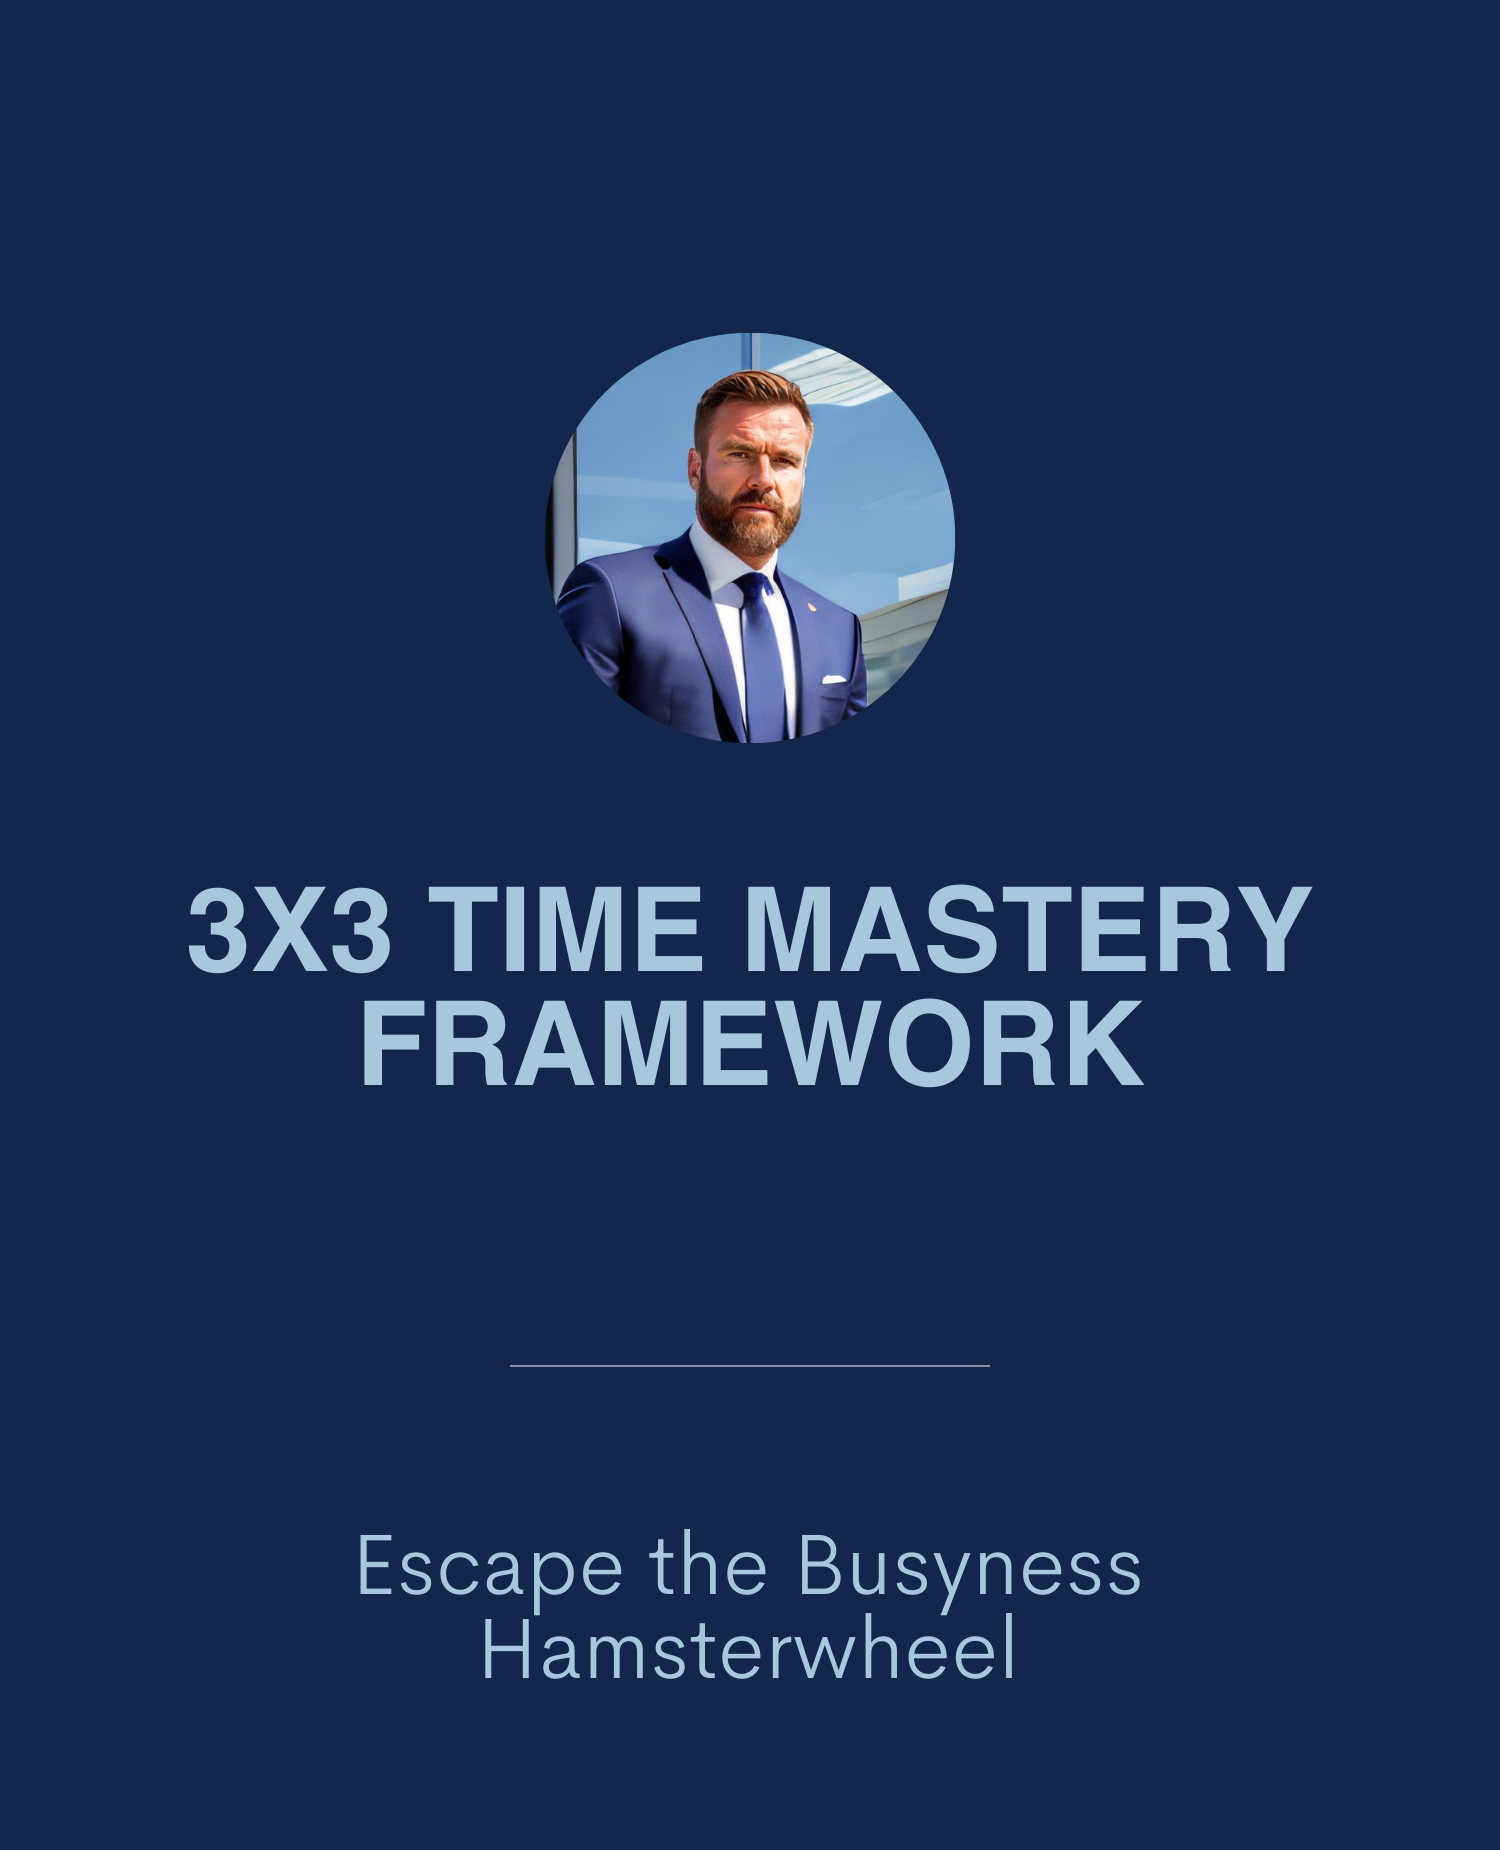 Diligent Sunday #24: Escape your Busyness Hamster Wheel with the 3x3 Time Mastery Framework